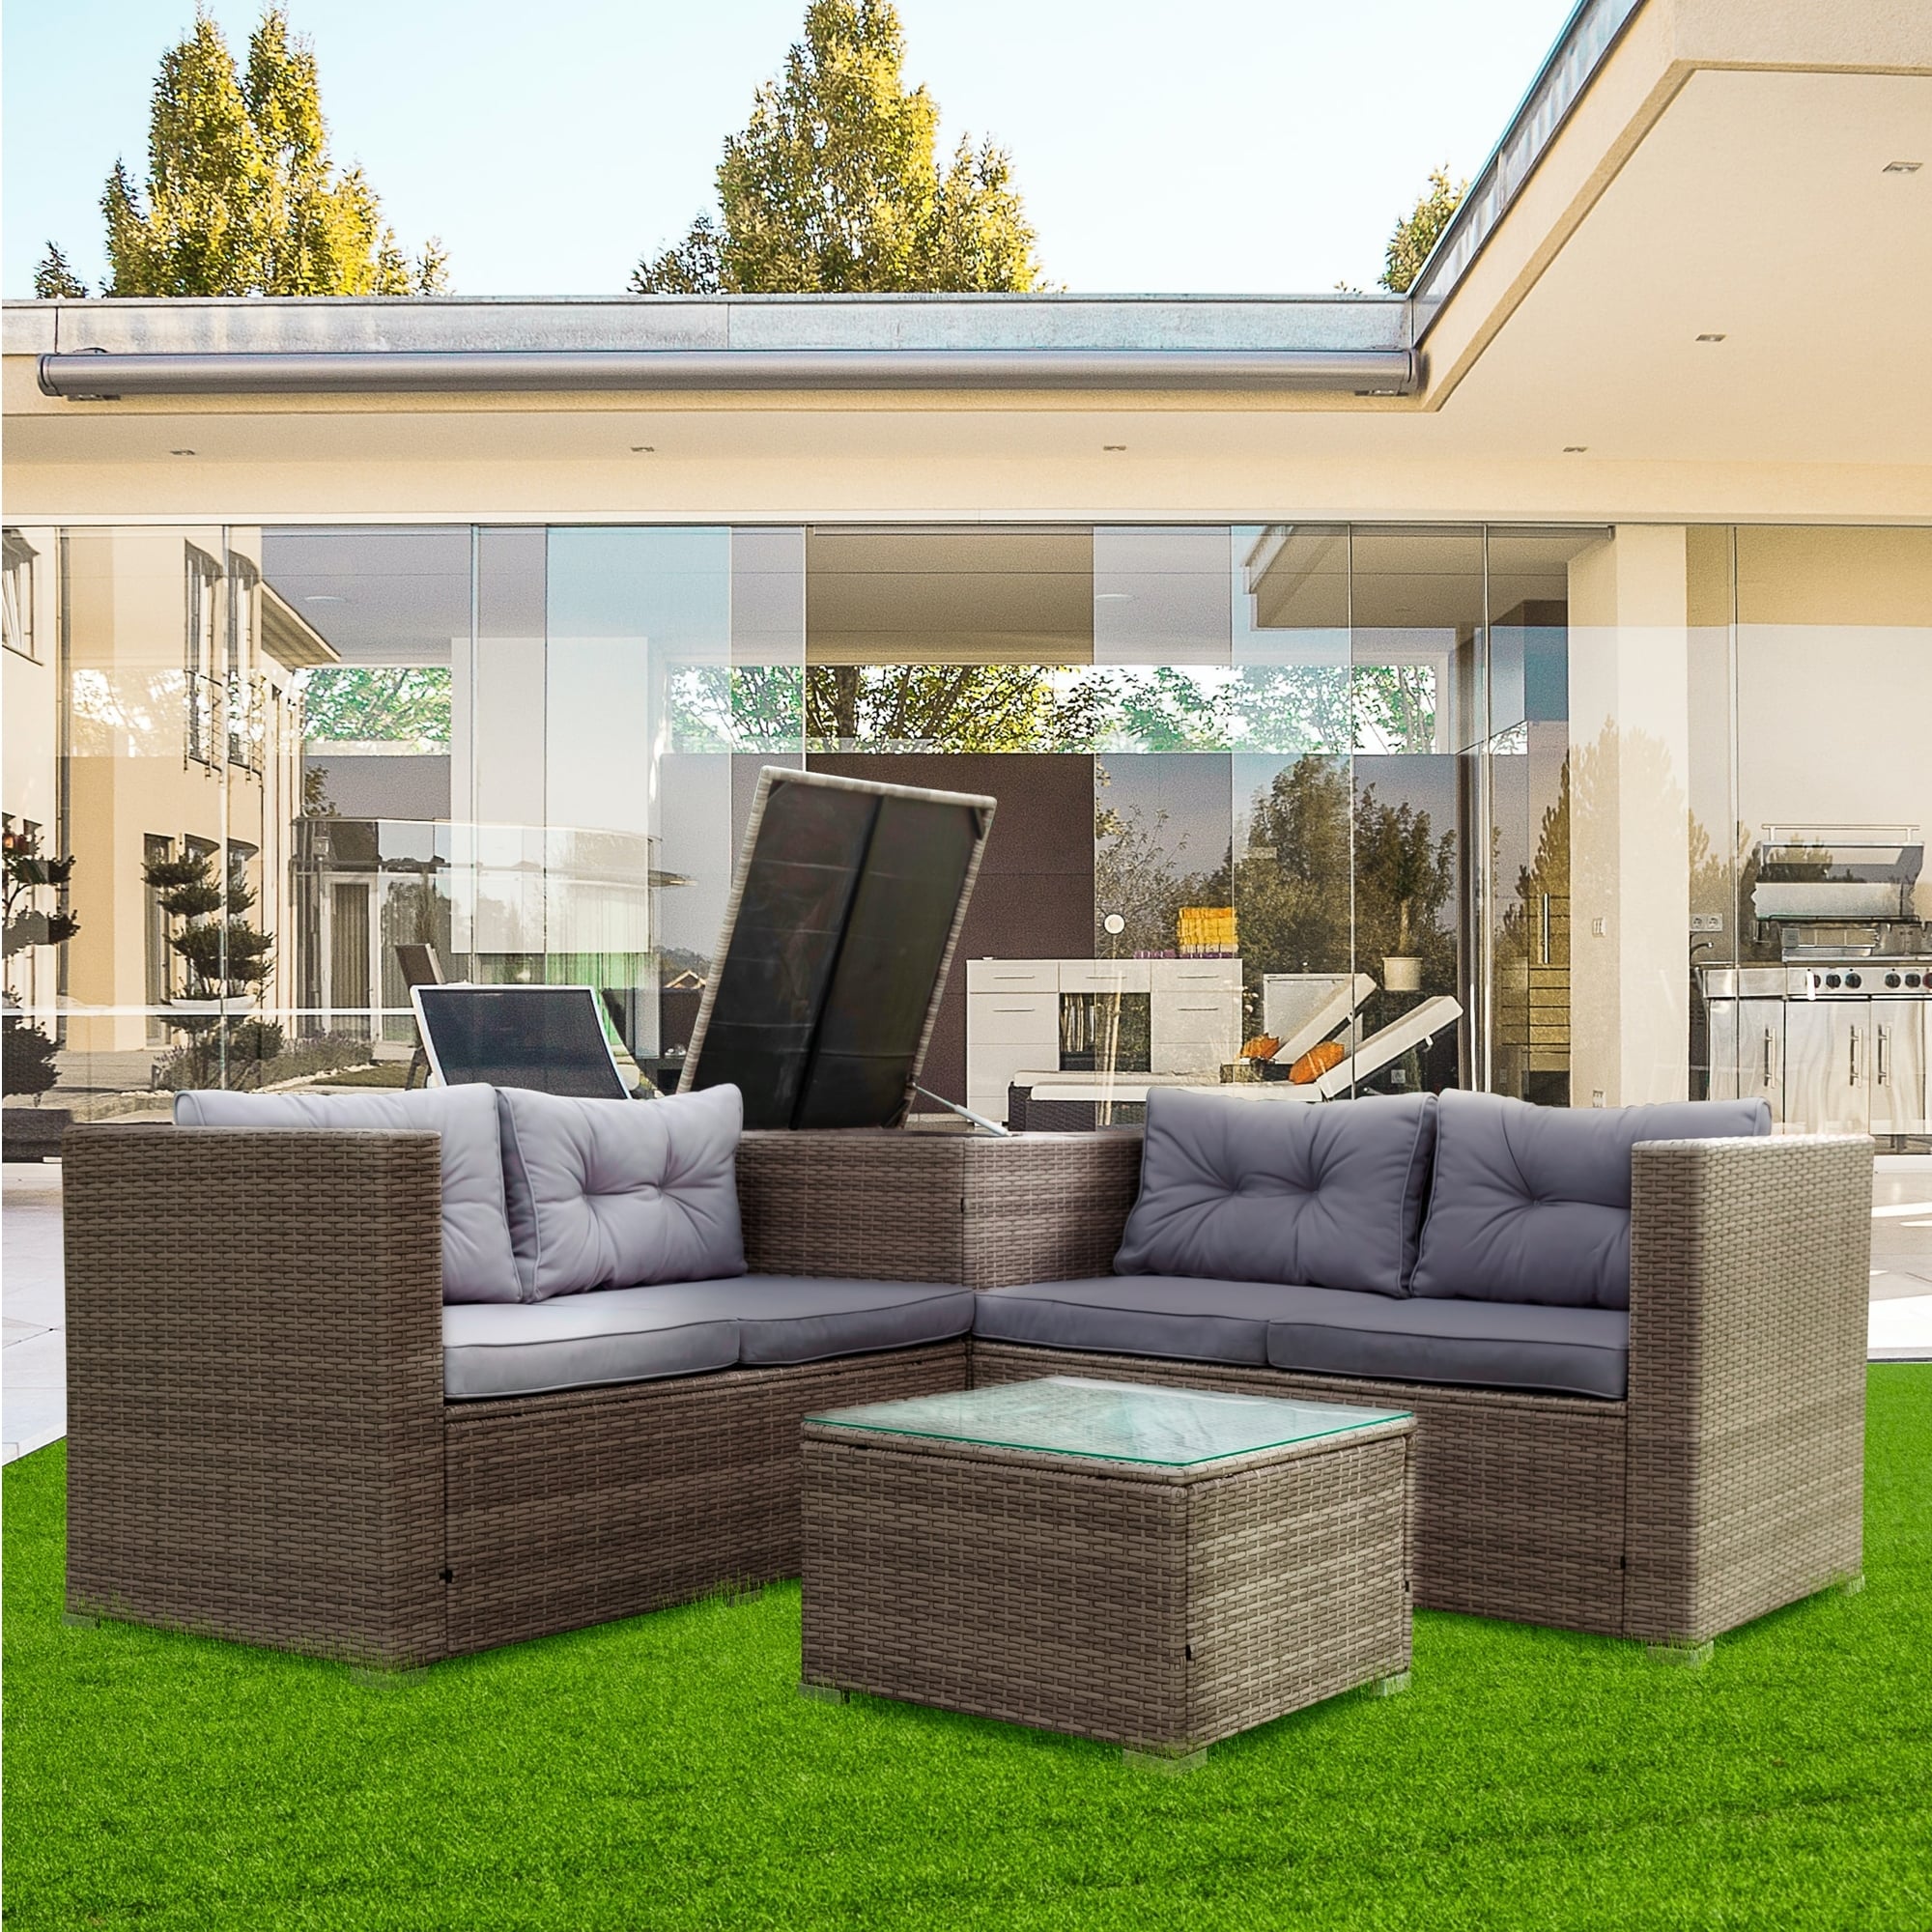 4 Piece Patio Sectional Wicker Rattan Outdoor Furniture Sofa Set With Storage Box